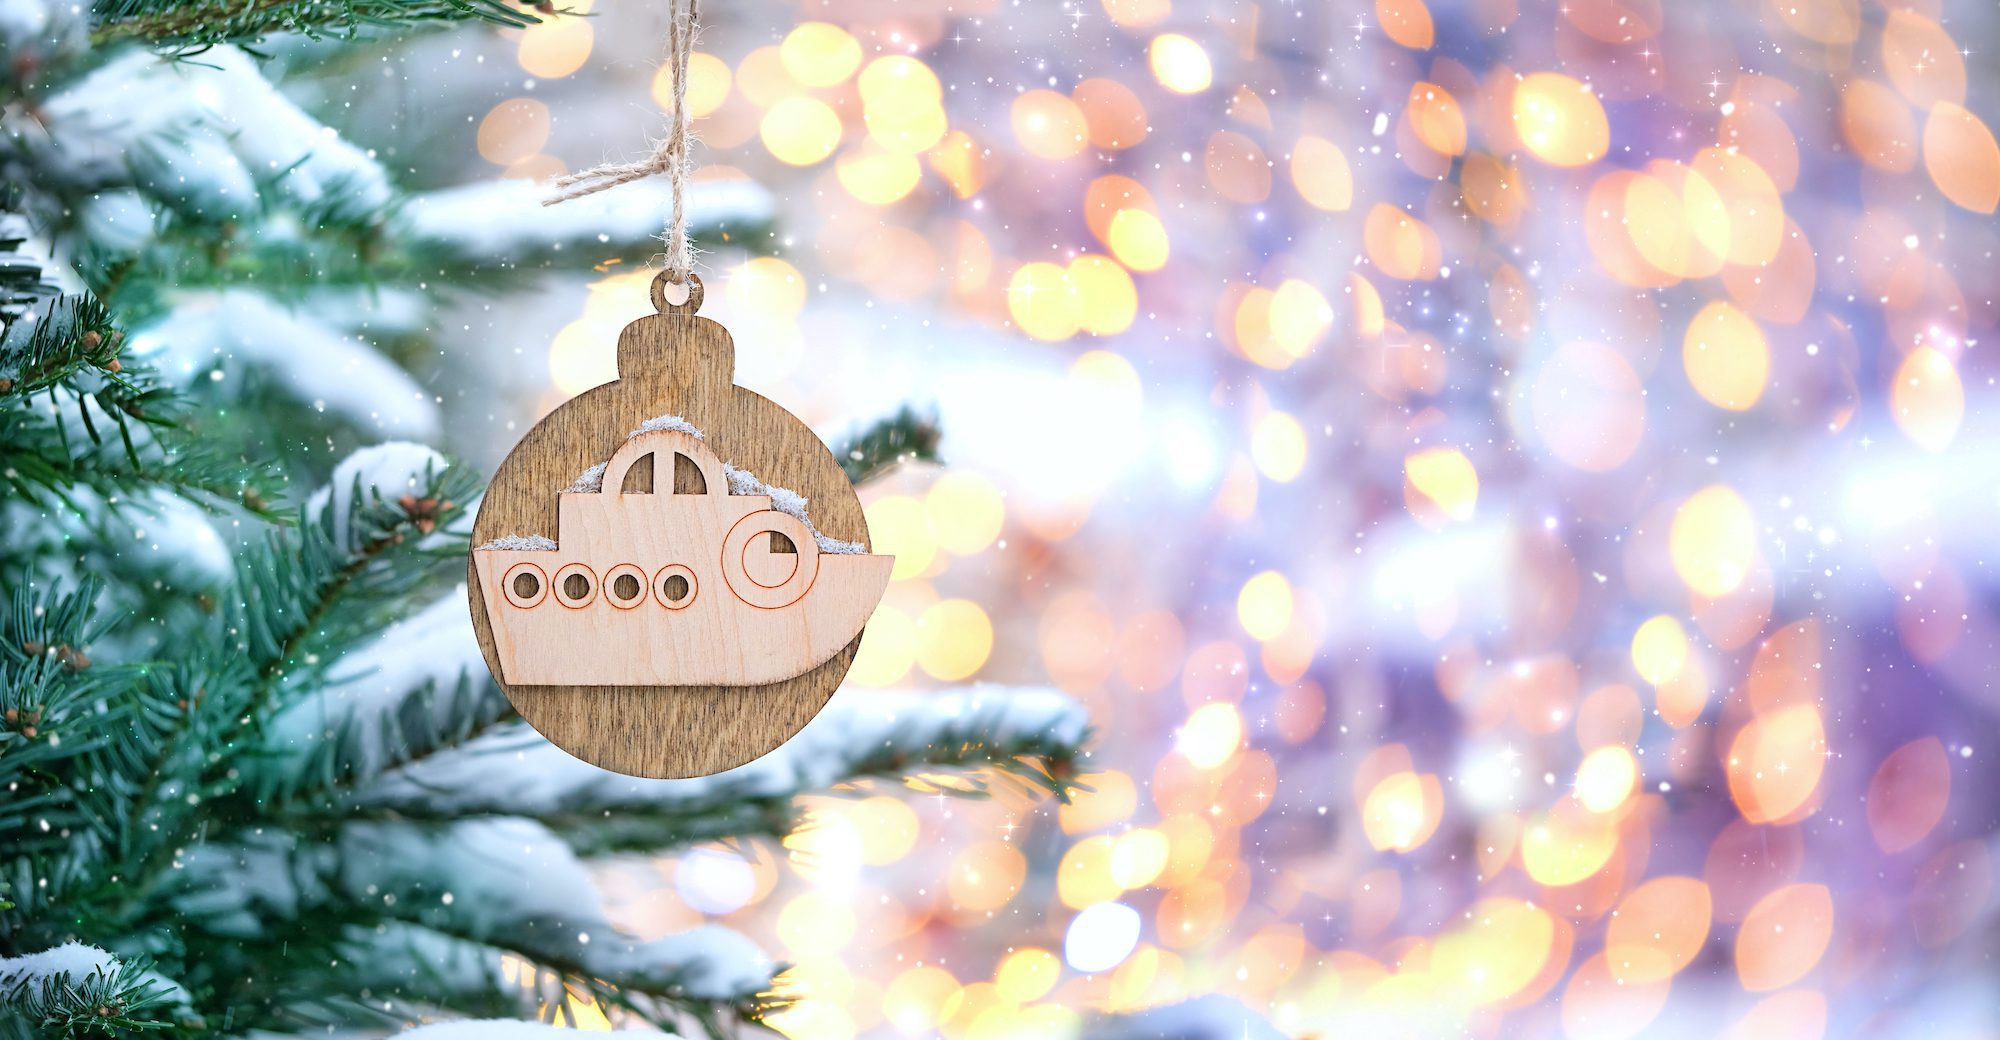 Rising Cost of Christmas Ornaments Shows Supply Chain Challenges Facing Manufacturers and Retailers